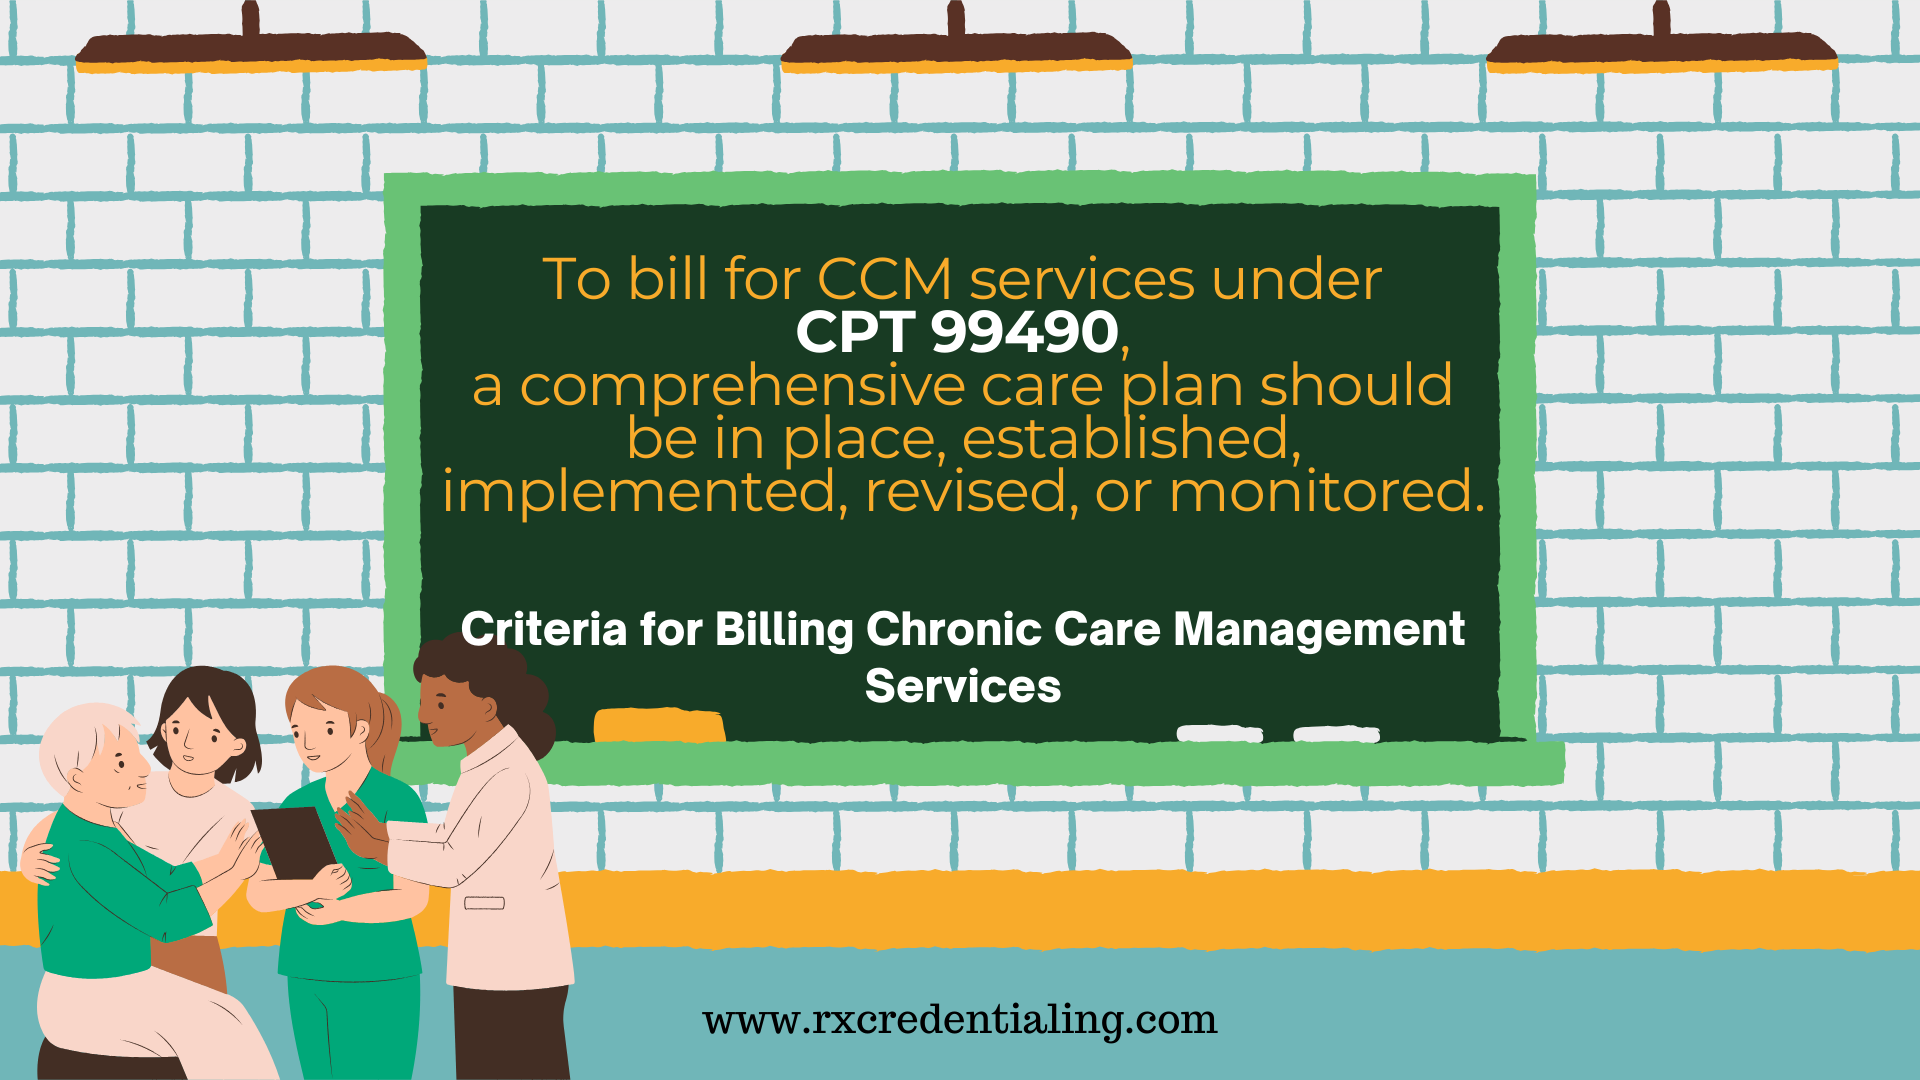 To bill for CCM services under CPT 99490, a comprehensive care plan should be in place, established, implemented, revised, or monitored.